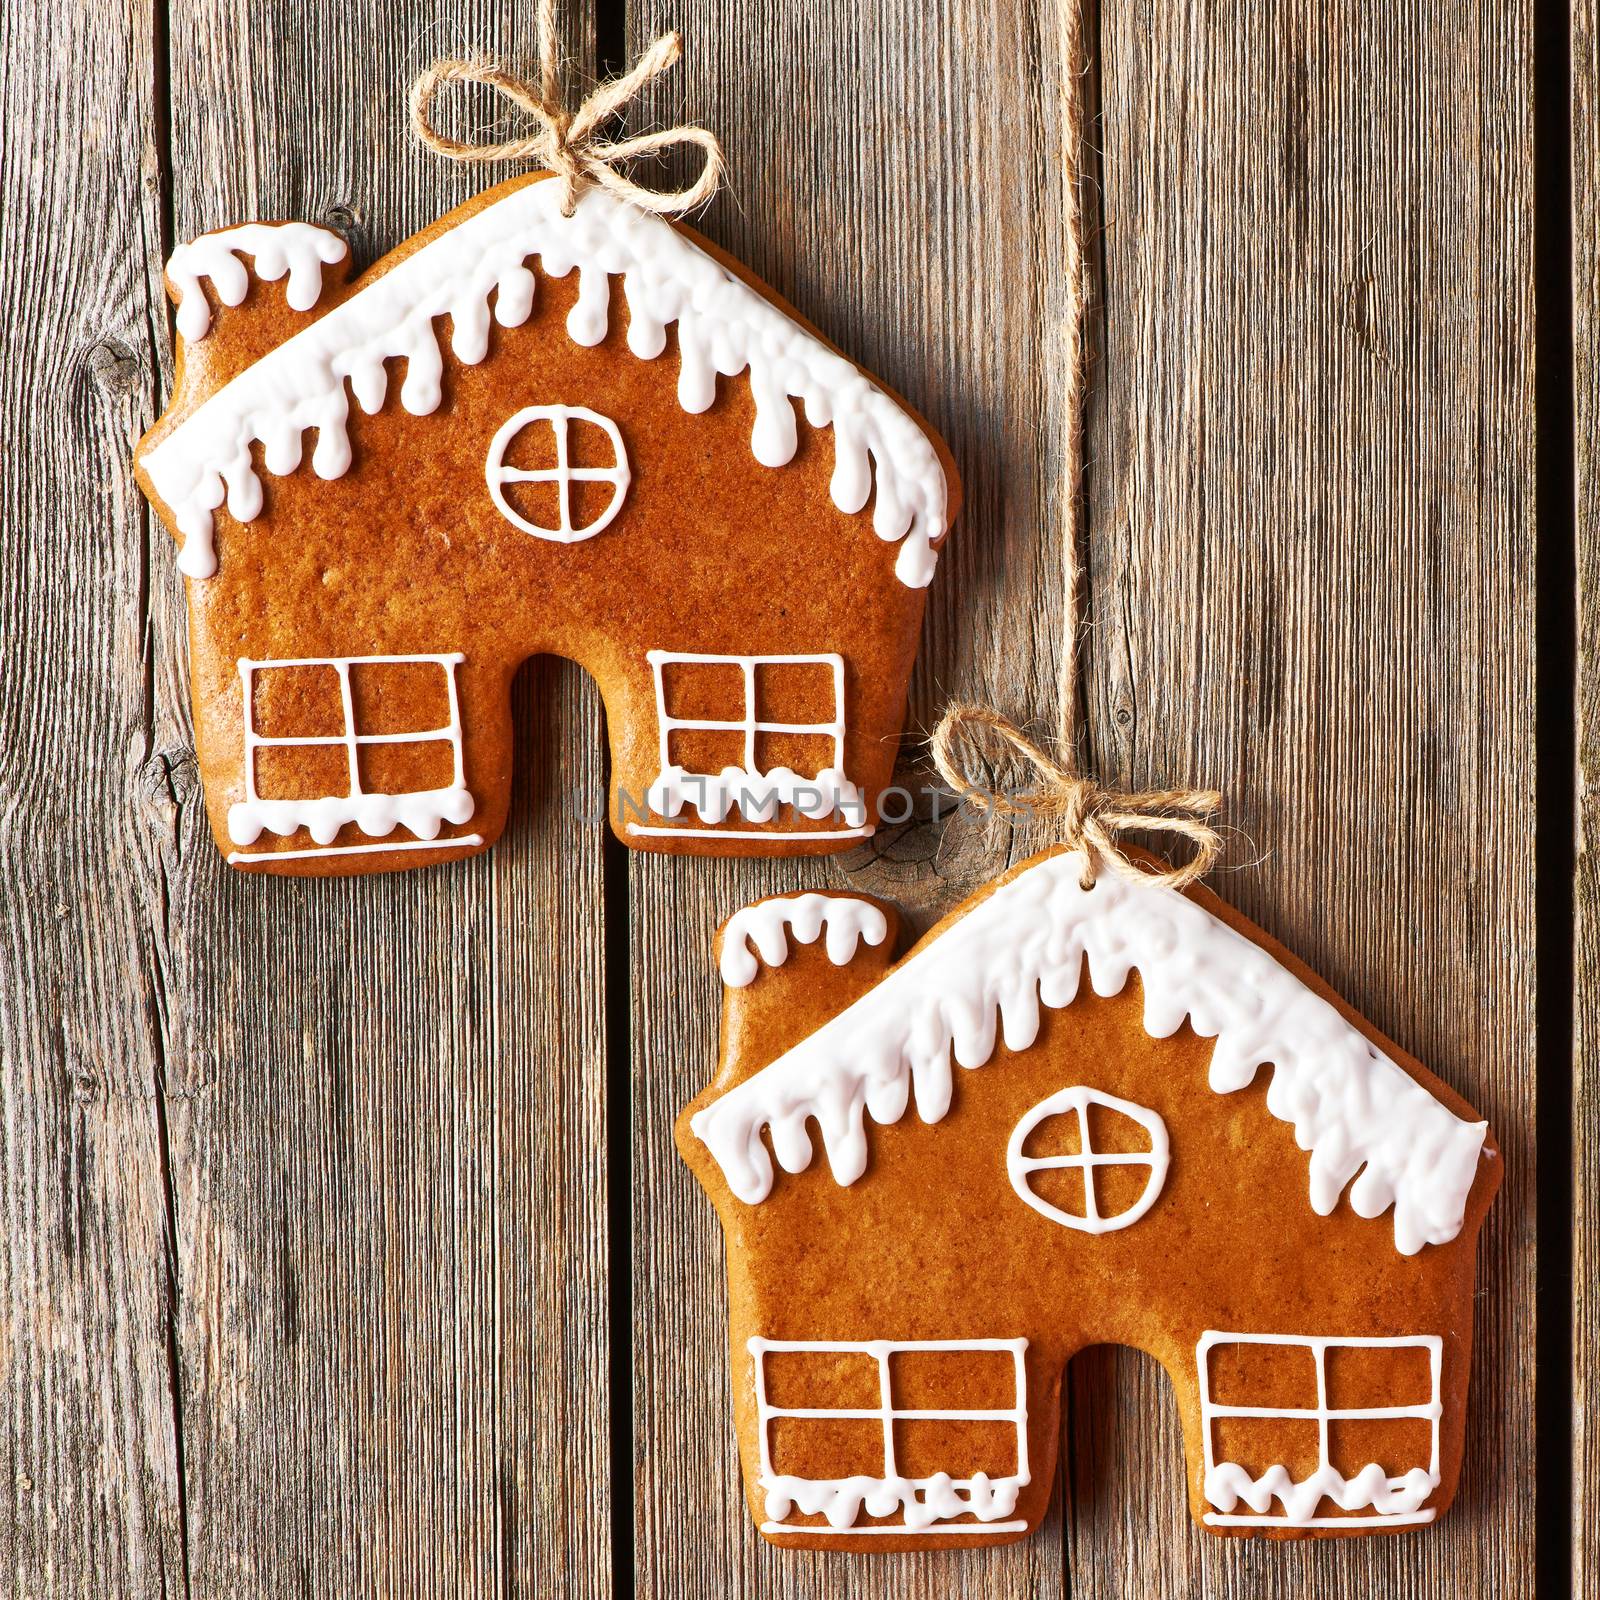 Christmas homemade gingerbread house cookies over wooden background